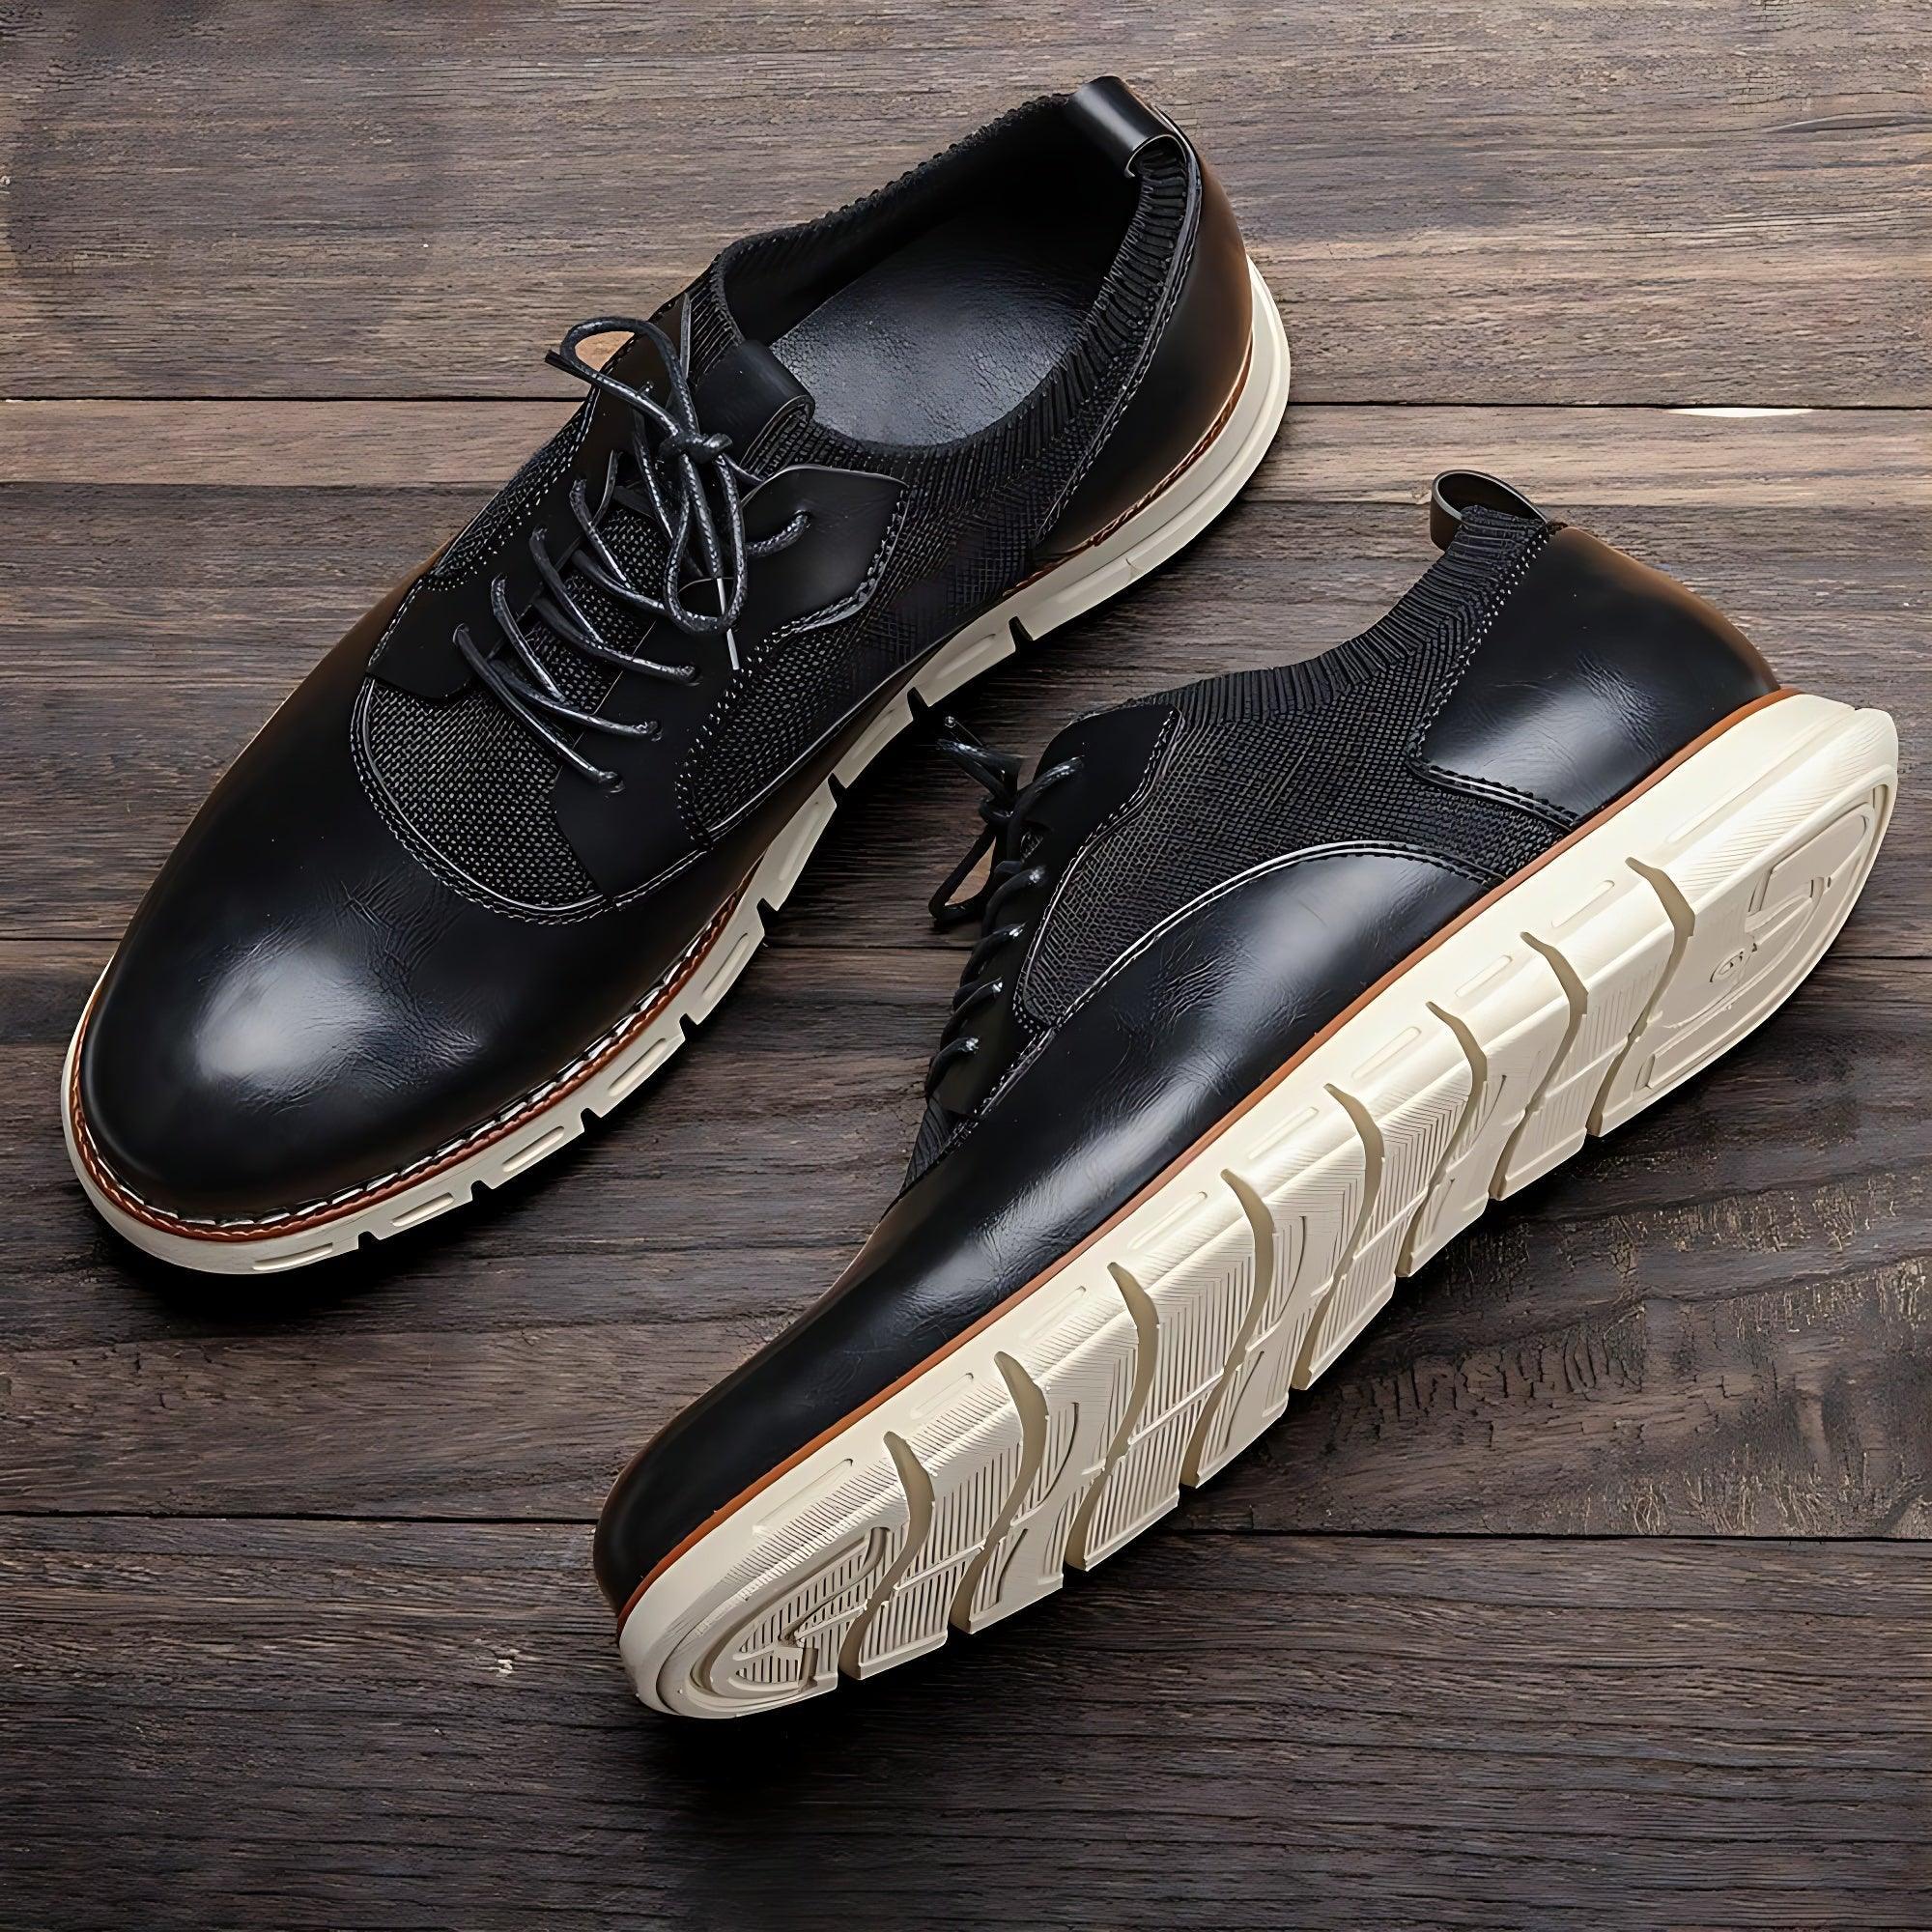 Business Casual Sneakers For Men - Touchy Style .